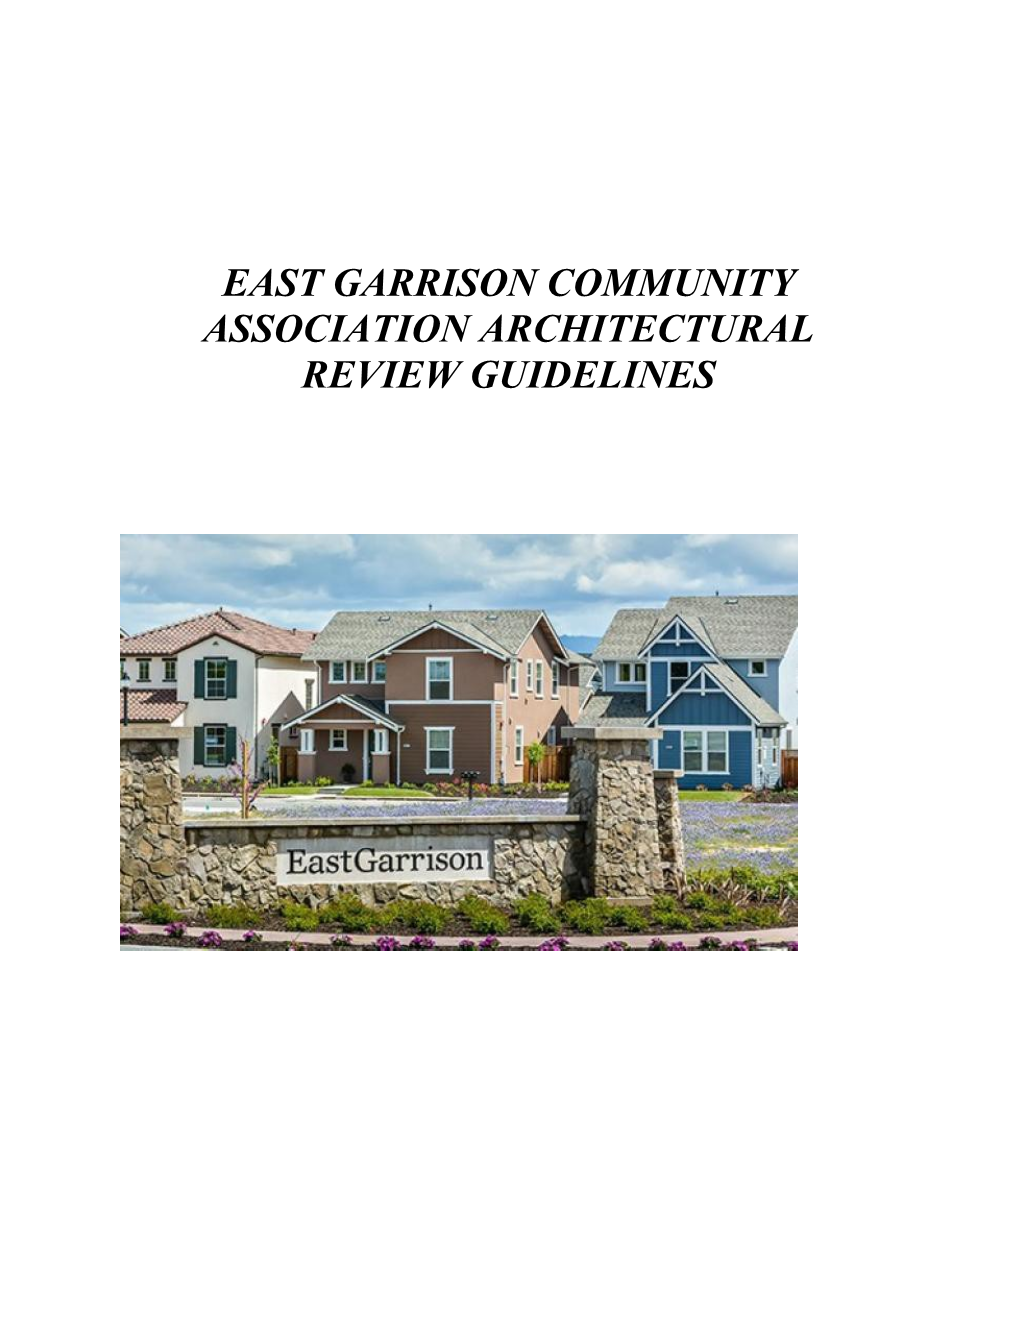 East Garrison Community Association Architectural Review Guidelines